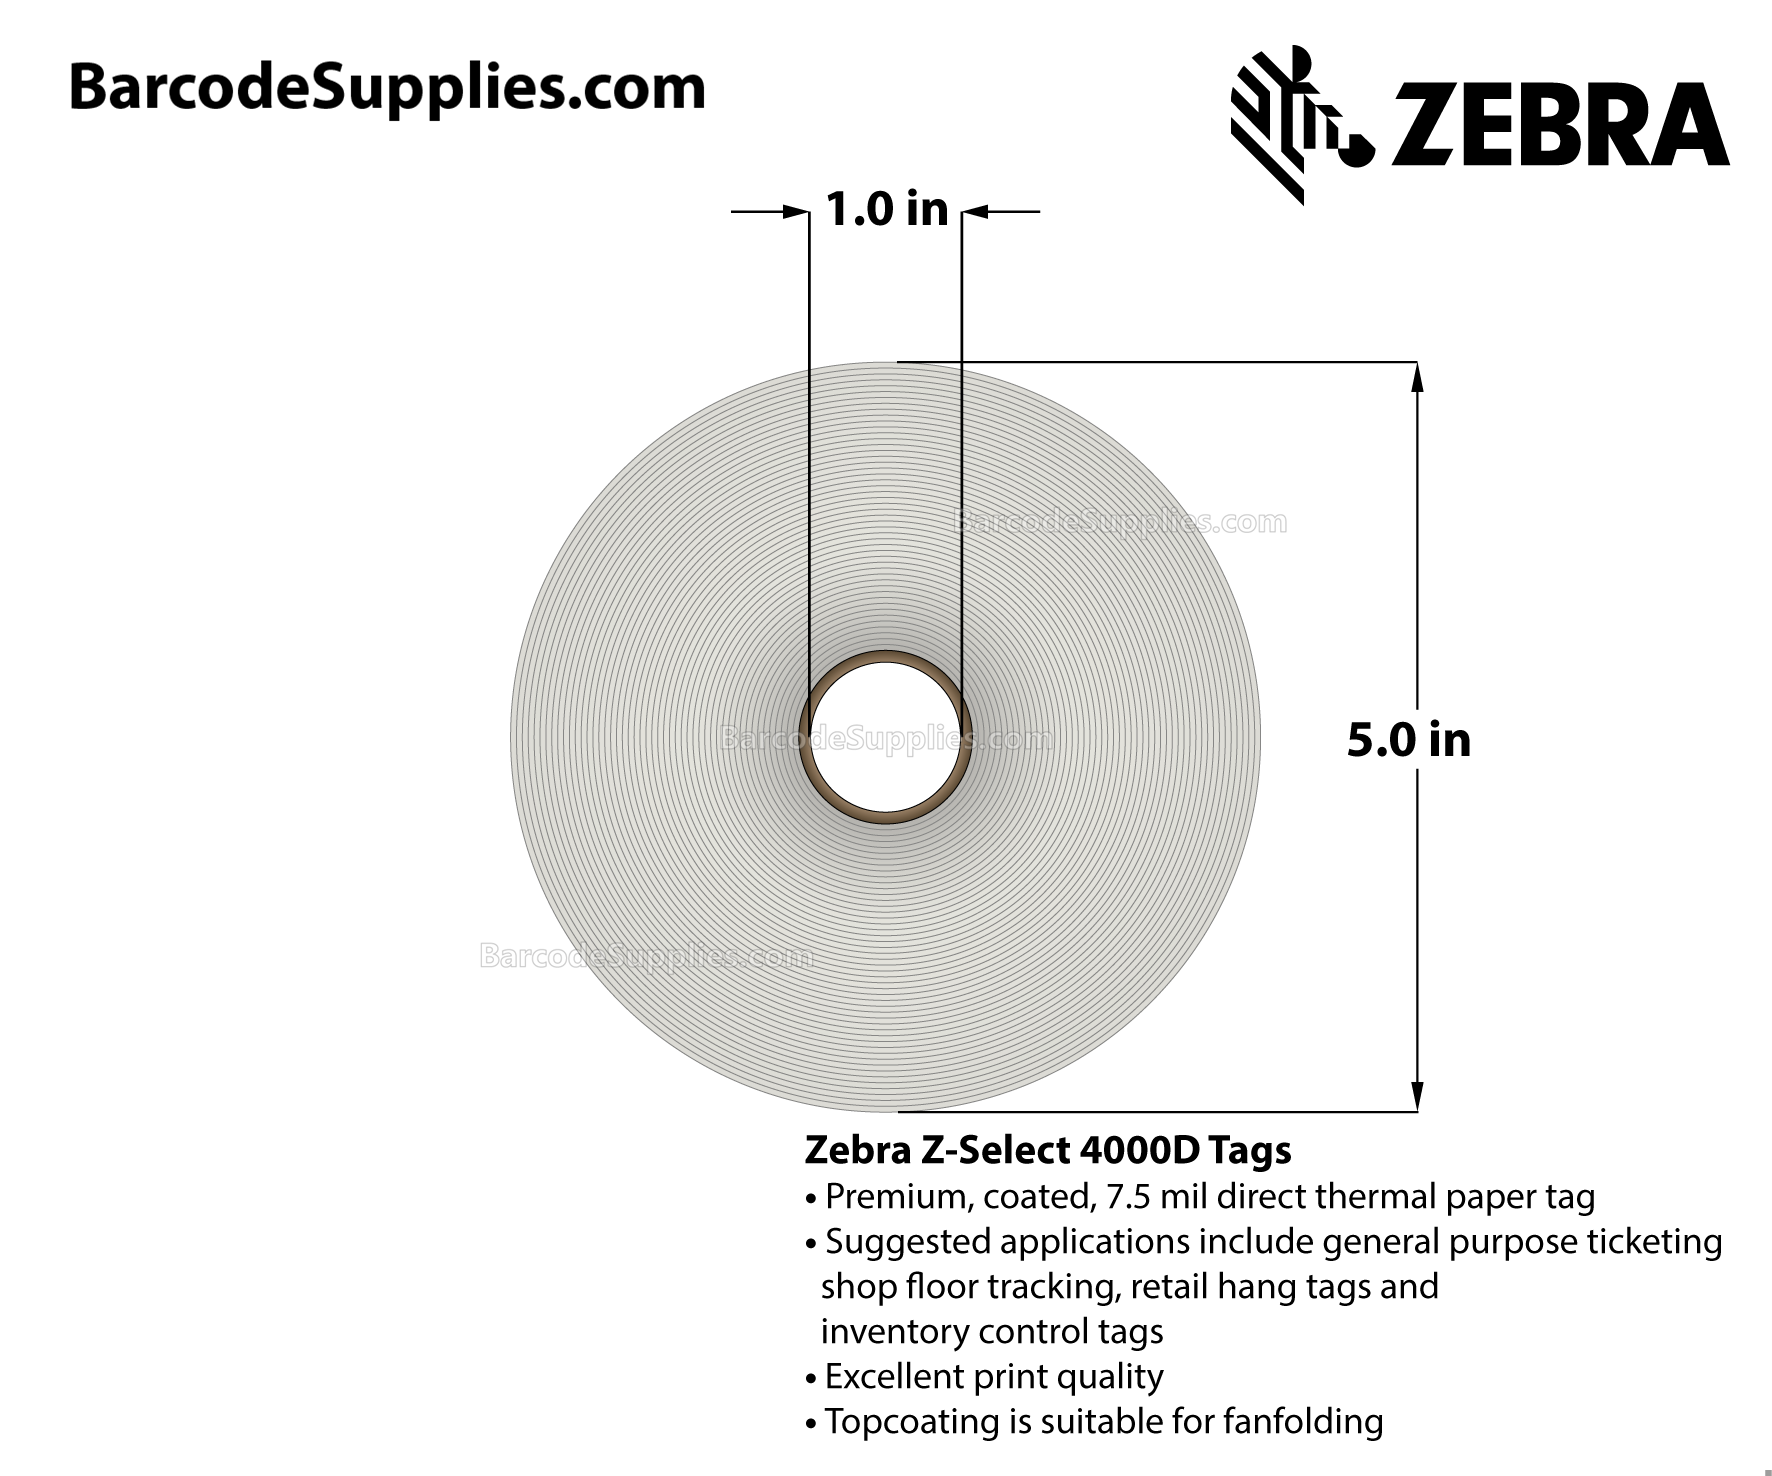 3.25 x 1.875 Direct Thermal White Z-Select 4000D 7 mil Tag Tags With No Adhesive - Contains sensing notch - Perforated - 1170 Tags Per Roll - Carton Of 6 Rolls - 7020 Tags Total - MPN: 10010055